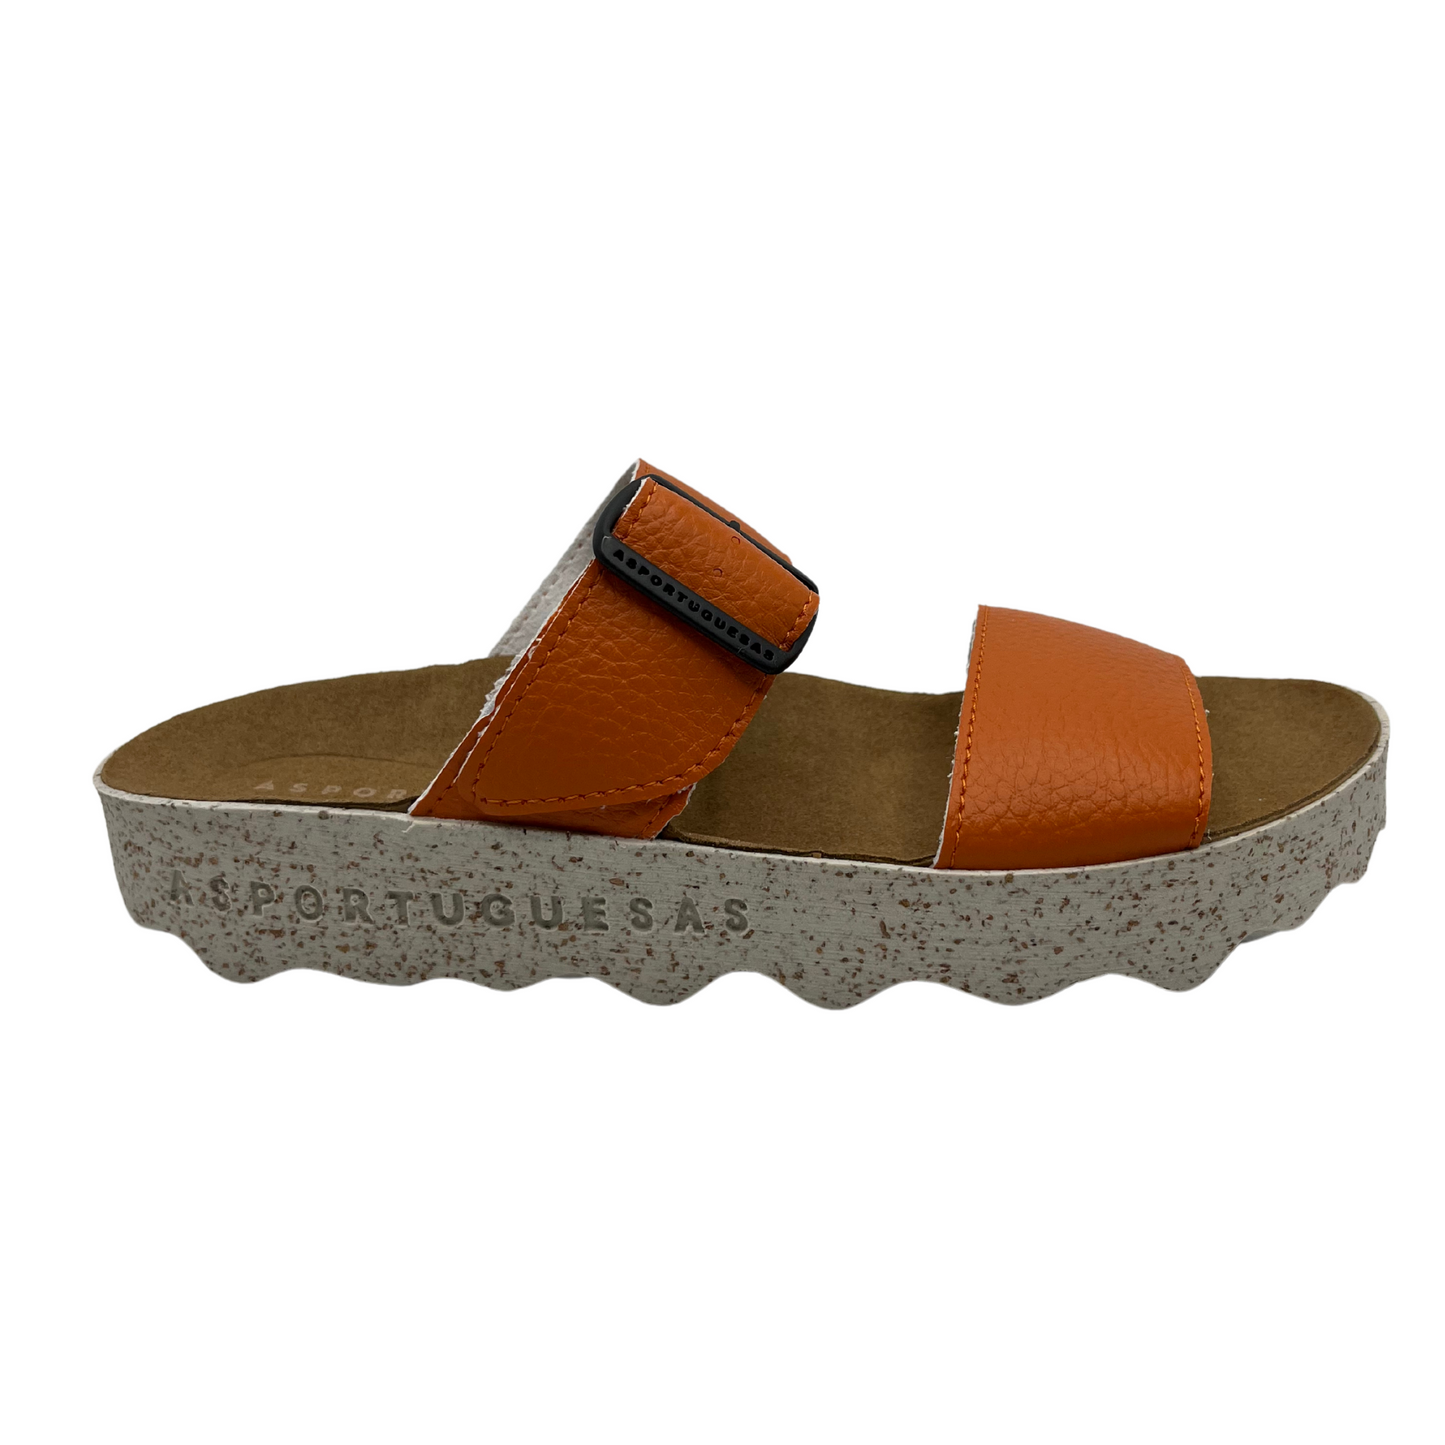 Right facing view of orange strapped sandal with contoured footbed and speckled white and brown outsole